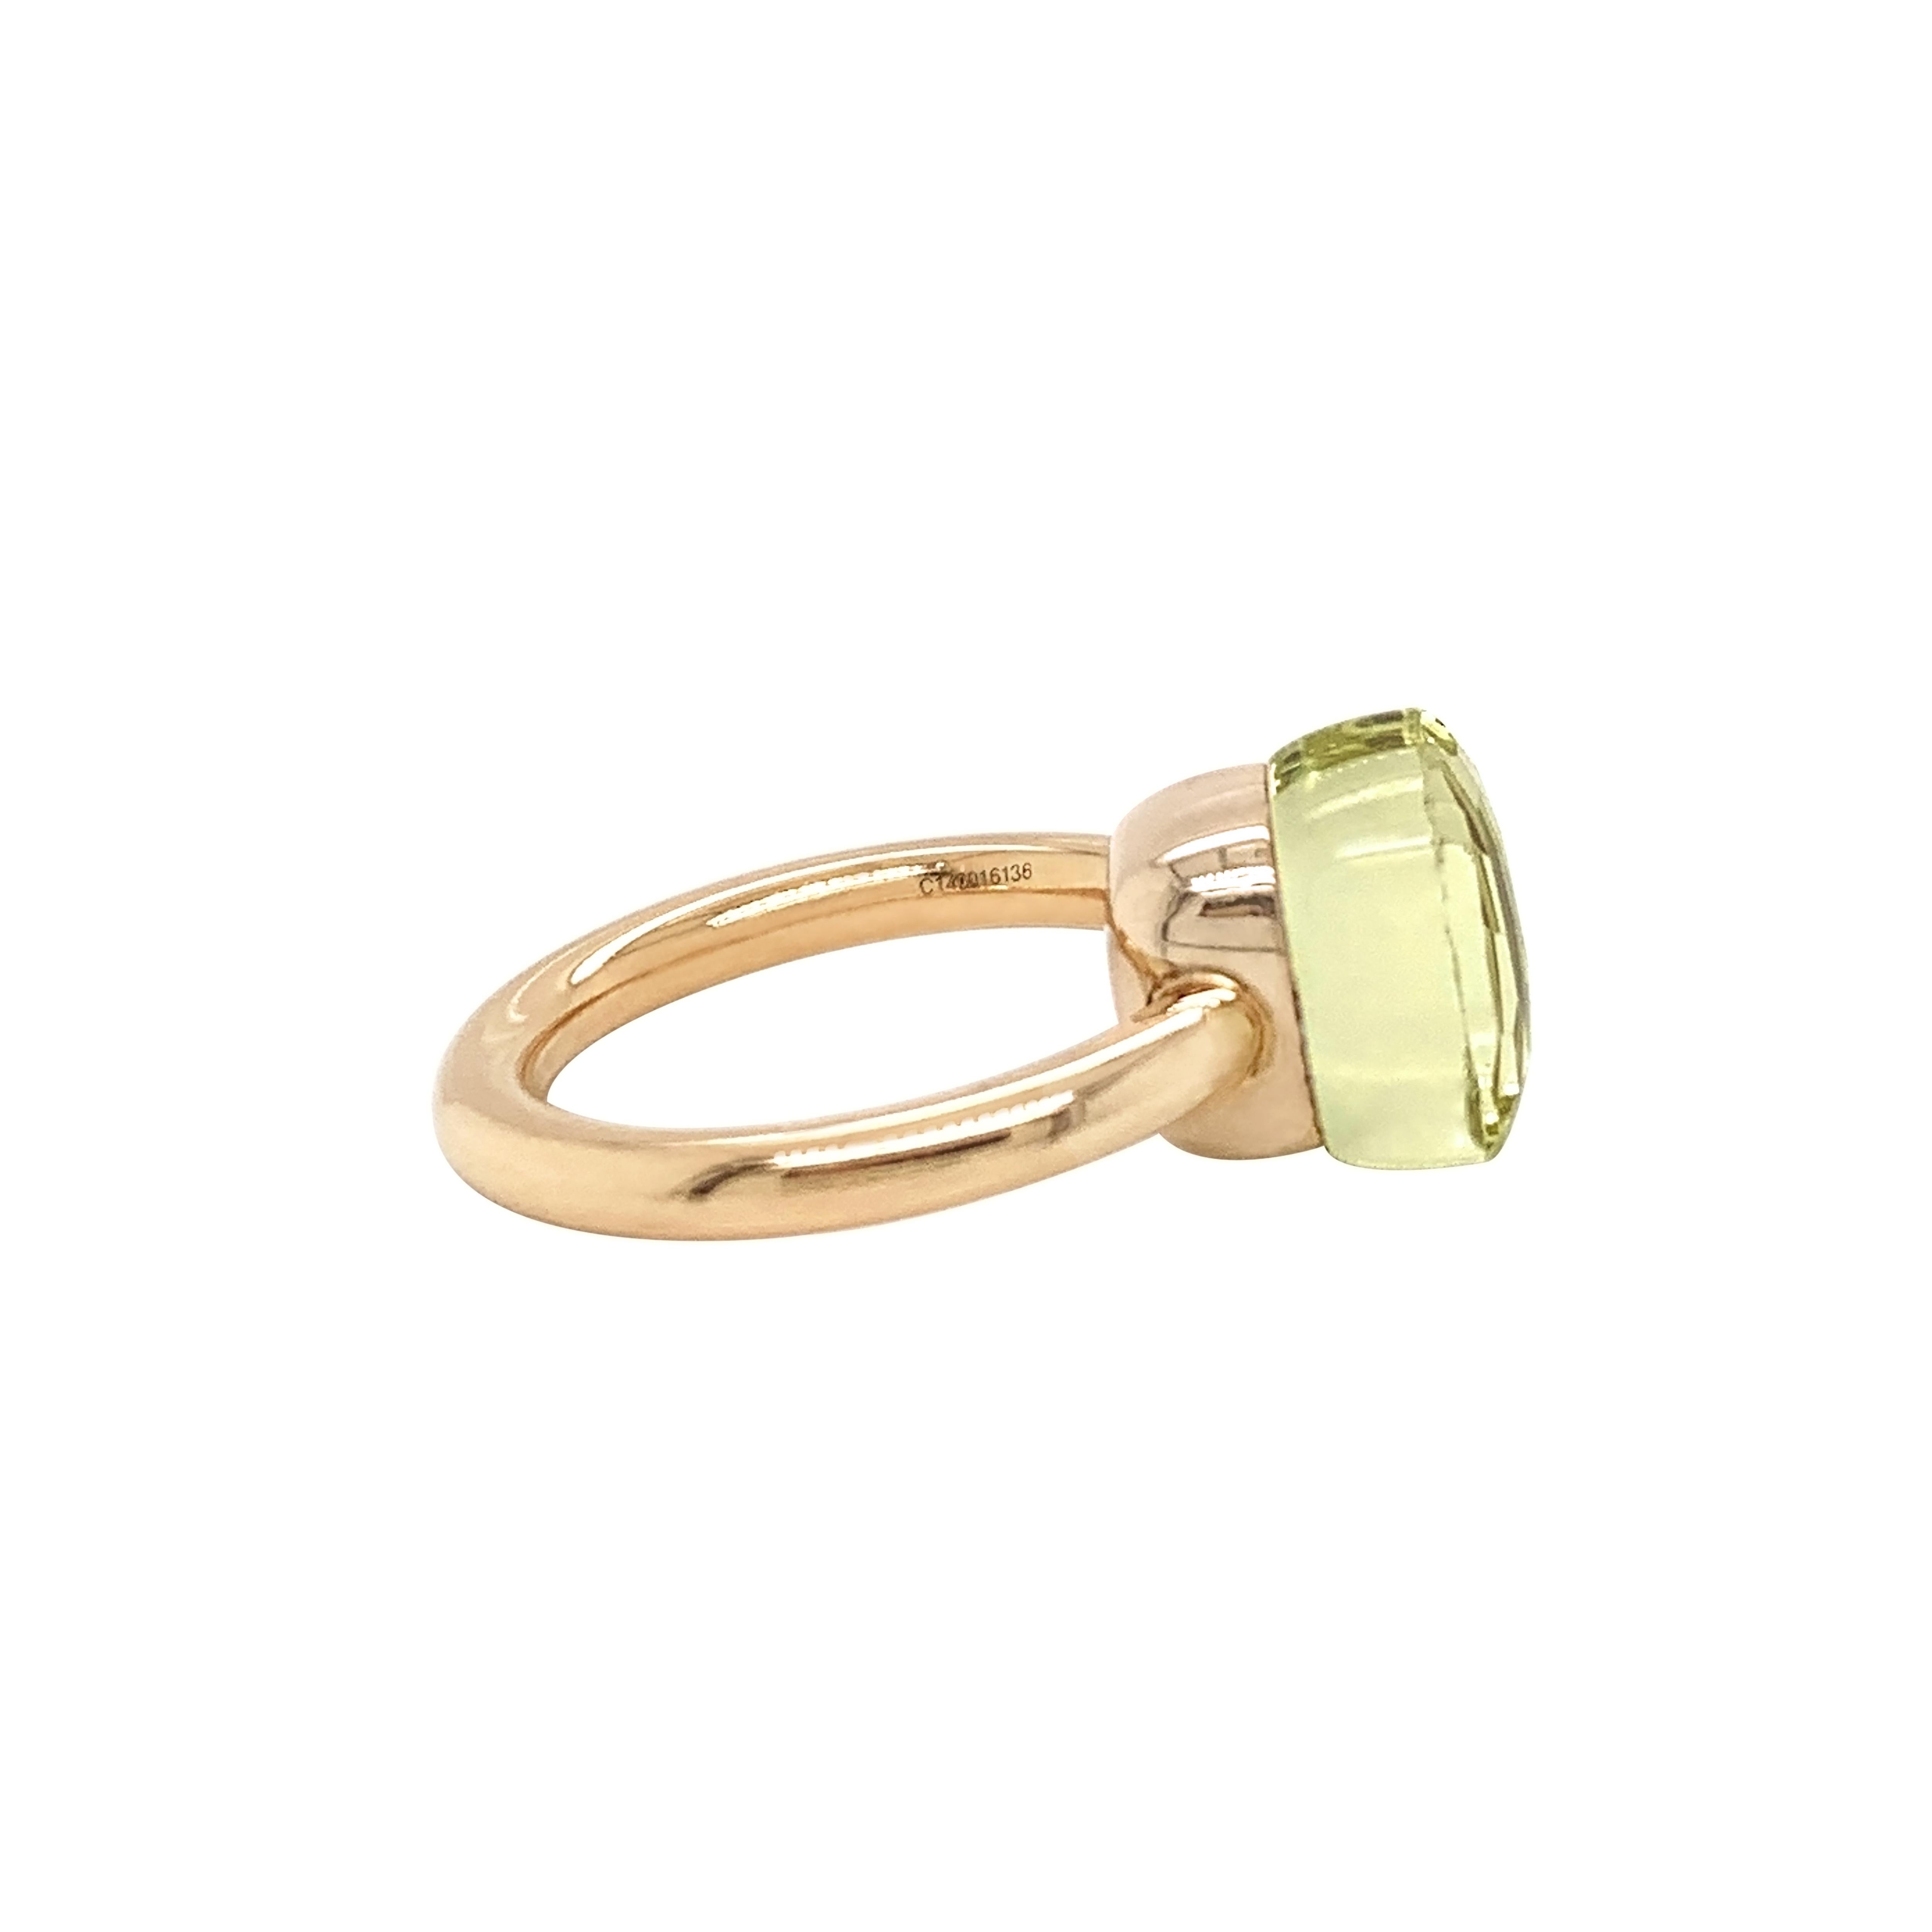 From the classic Pomellato 'Nudo' collection, a beautiful lemon quartz measuring approximately 10mm x 10mm and weighs approximately 5.00 carat mounted in 18 carat rose gold. The ring features the classic Pomellato signature and hallmarks. UK finger